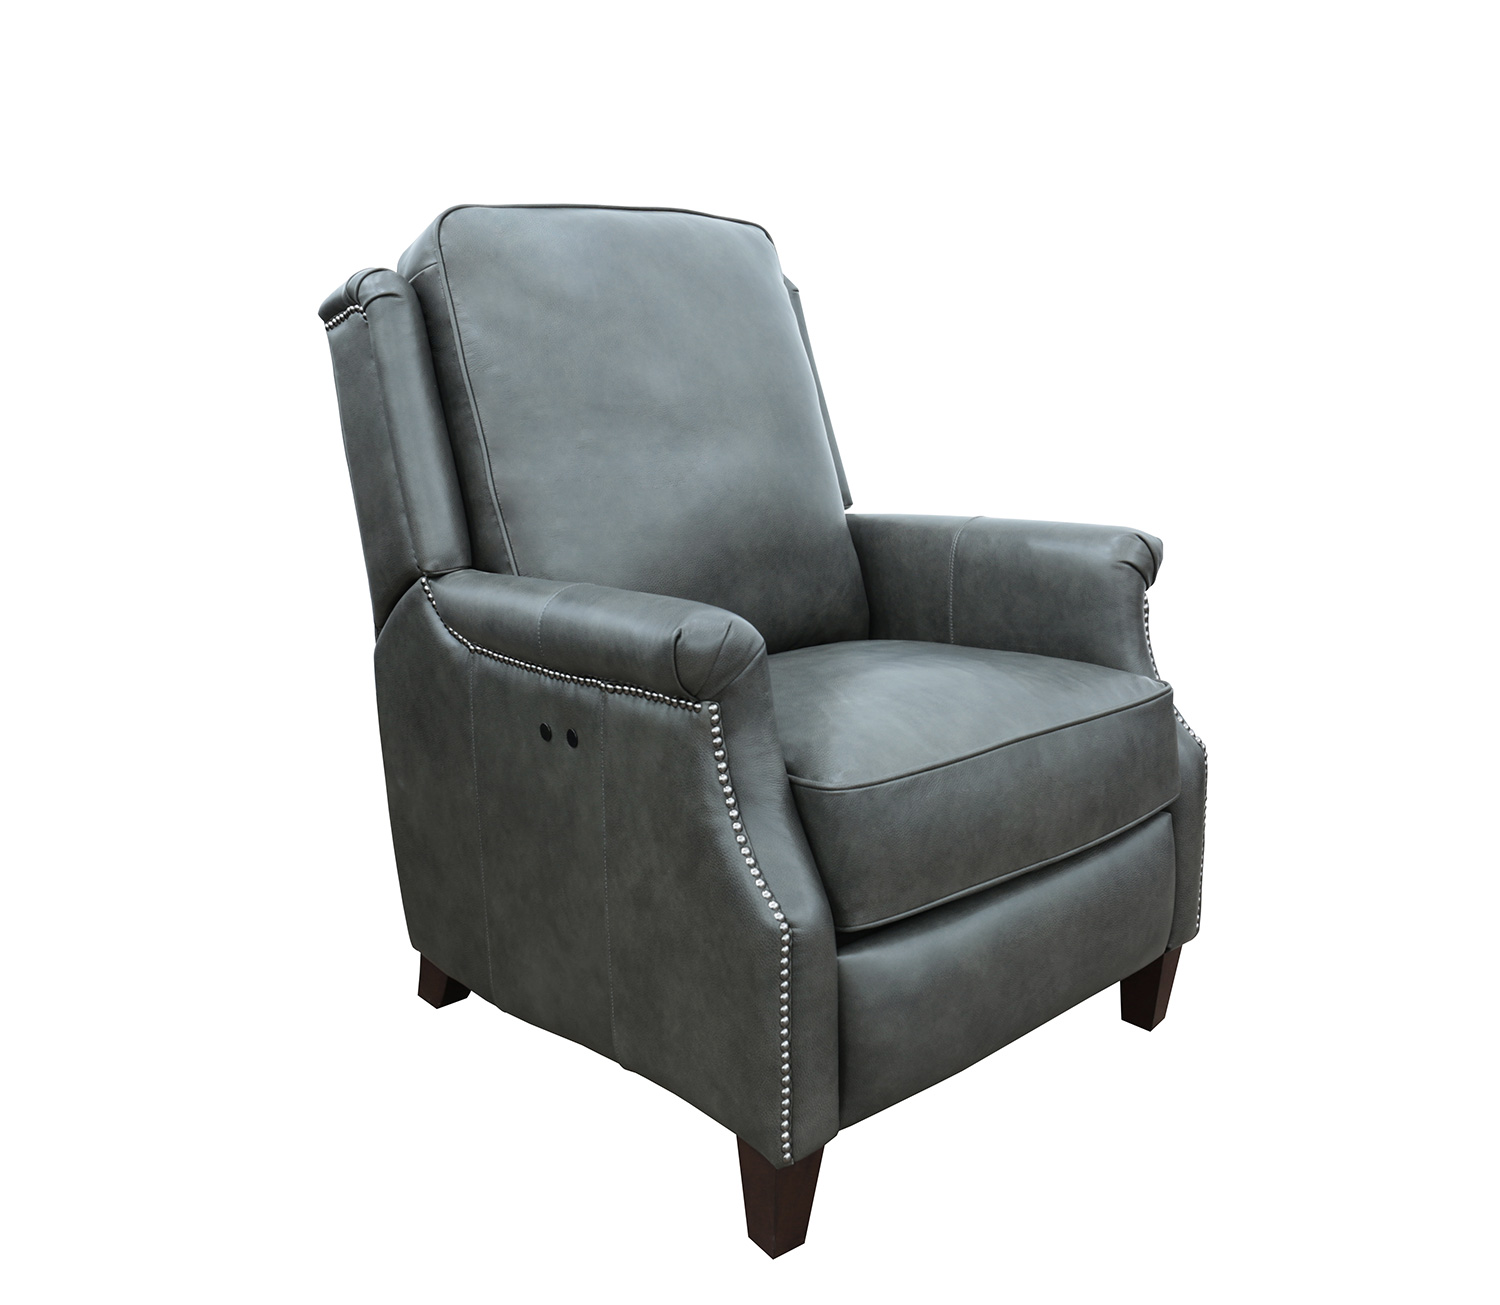 Barcalounger Riley Power Recliner Chair - Ashford Graphite/All Leather